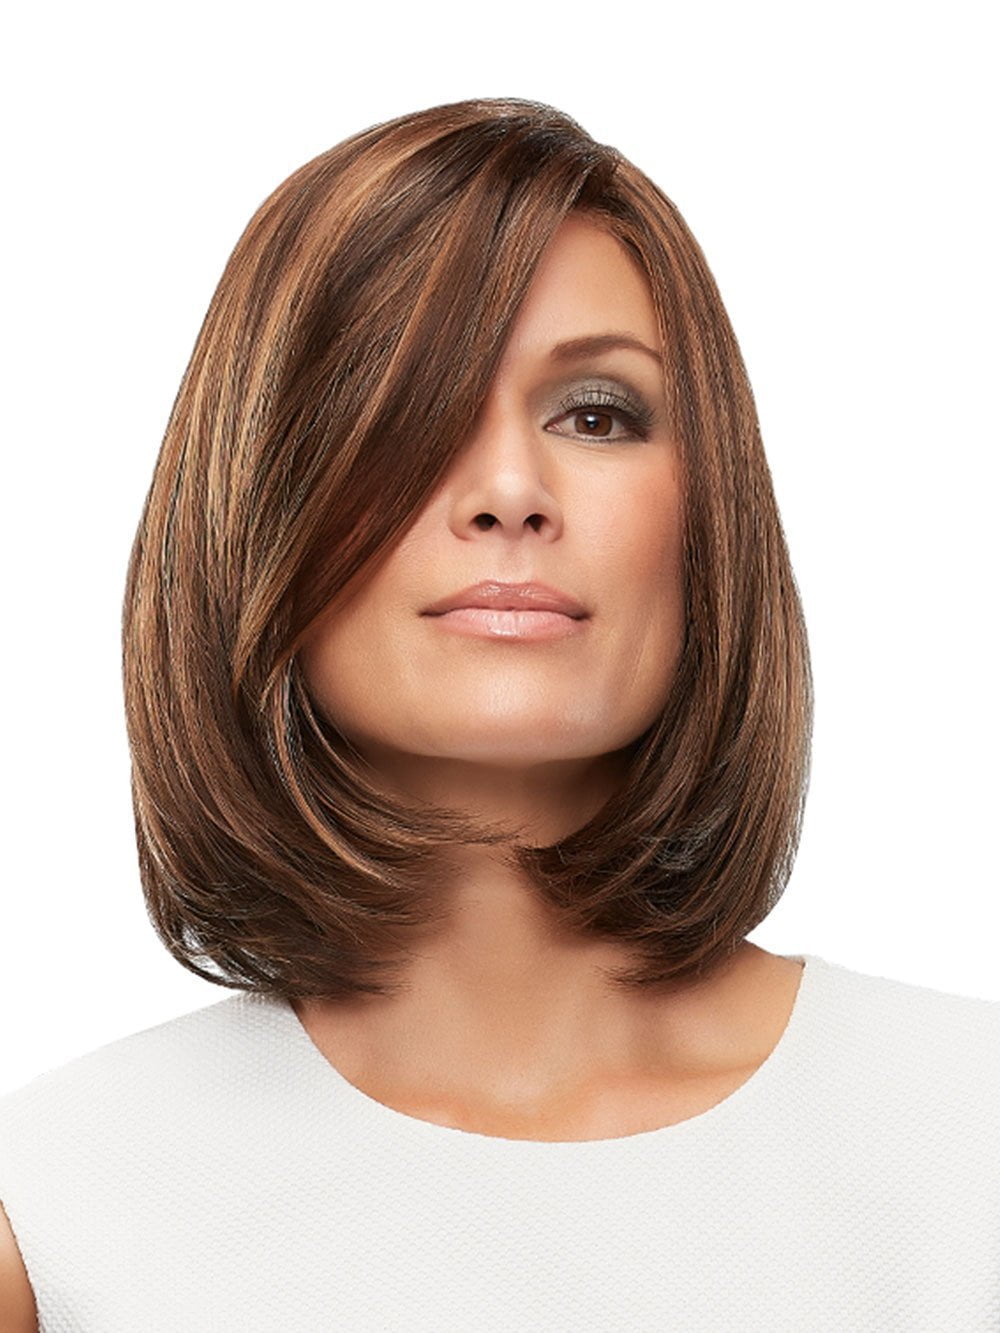 The Cameron Large Wig by Jon Renau is a lengthy bob with layered ends that create shape and movement